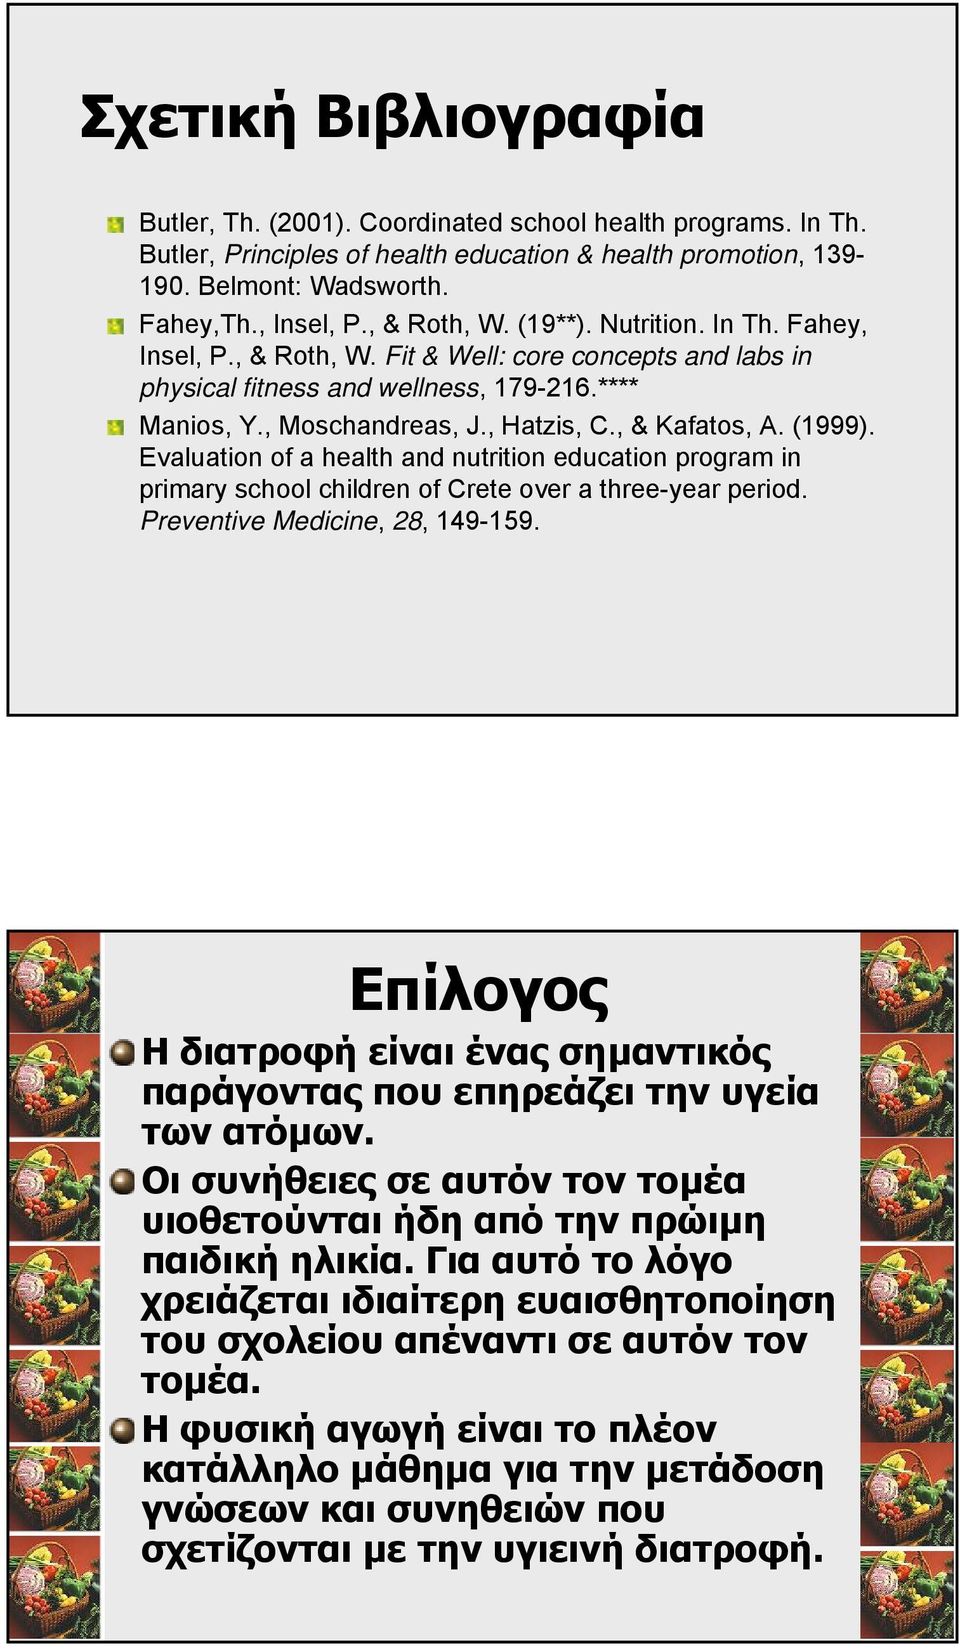 , & Kafatos, A. (1999). Evaluation of a health and nutrition education program in primary school children of Crete over a three-year period. Preventive Medicine, 28, 149-159.